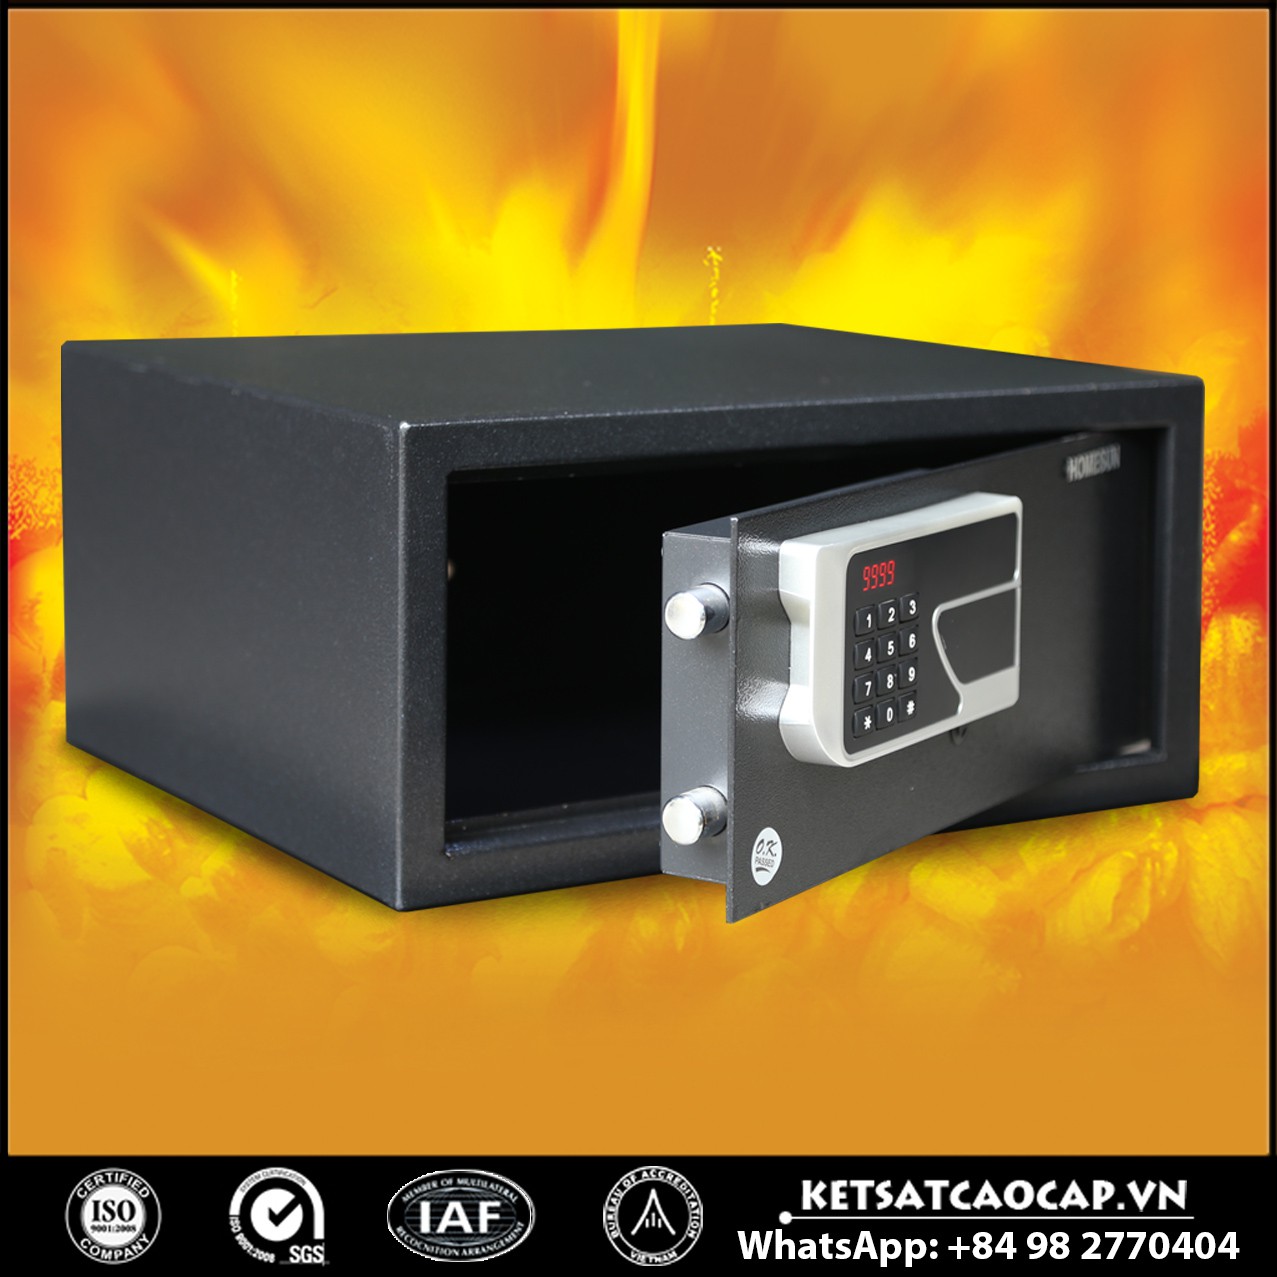 Used Hotel Safes Suppliers and Exporters‎